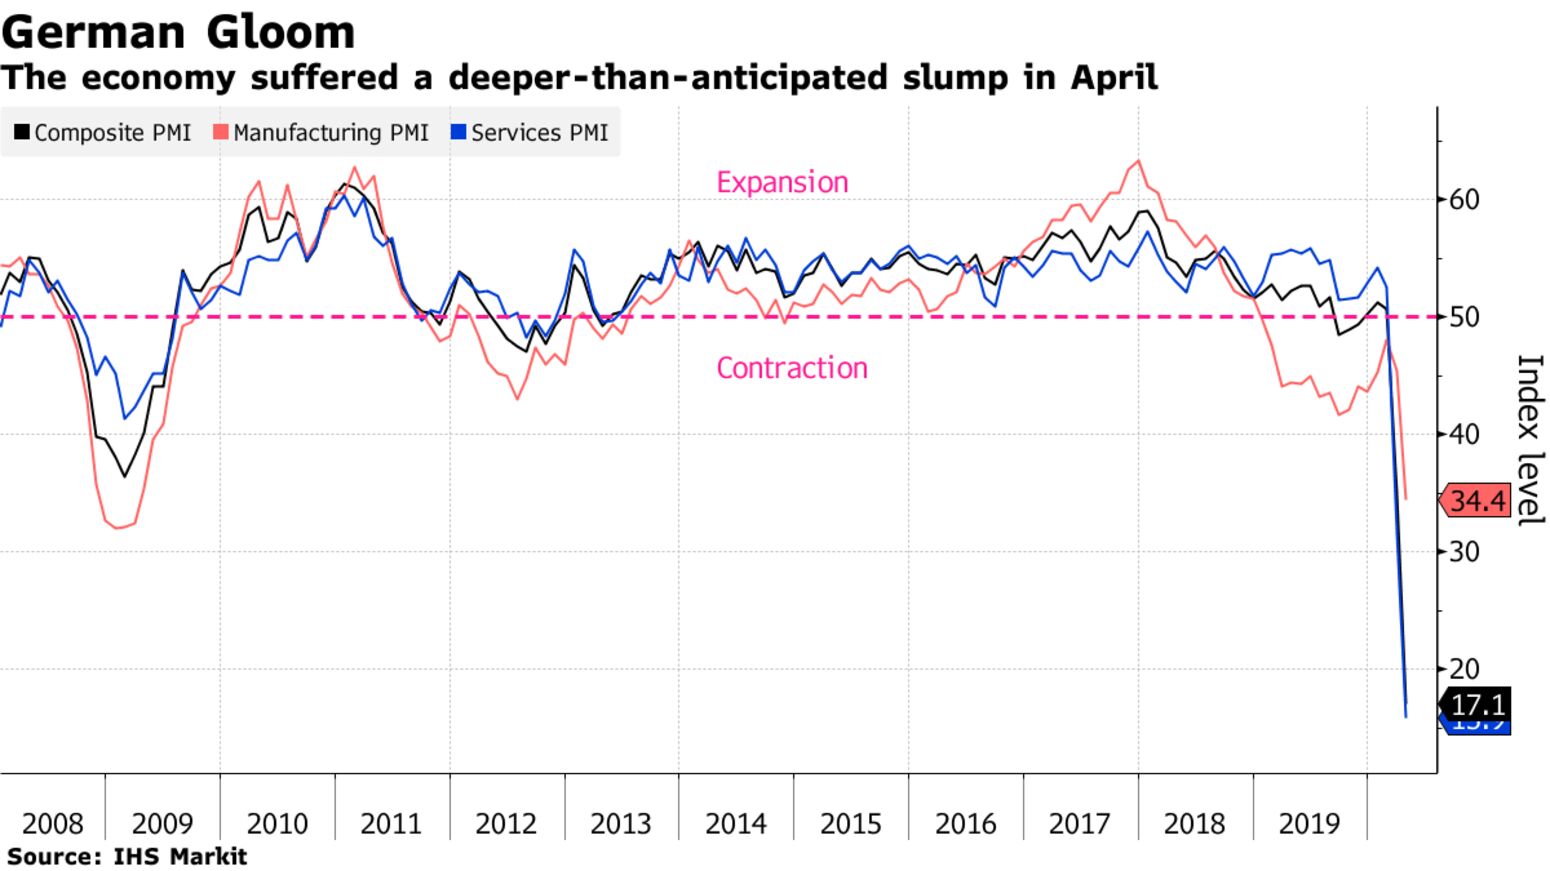 The economy suffered a deeper-than-anticipated slump in April